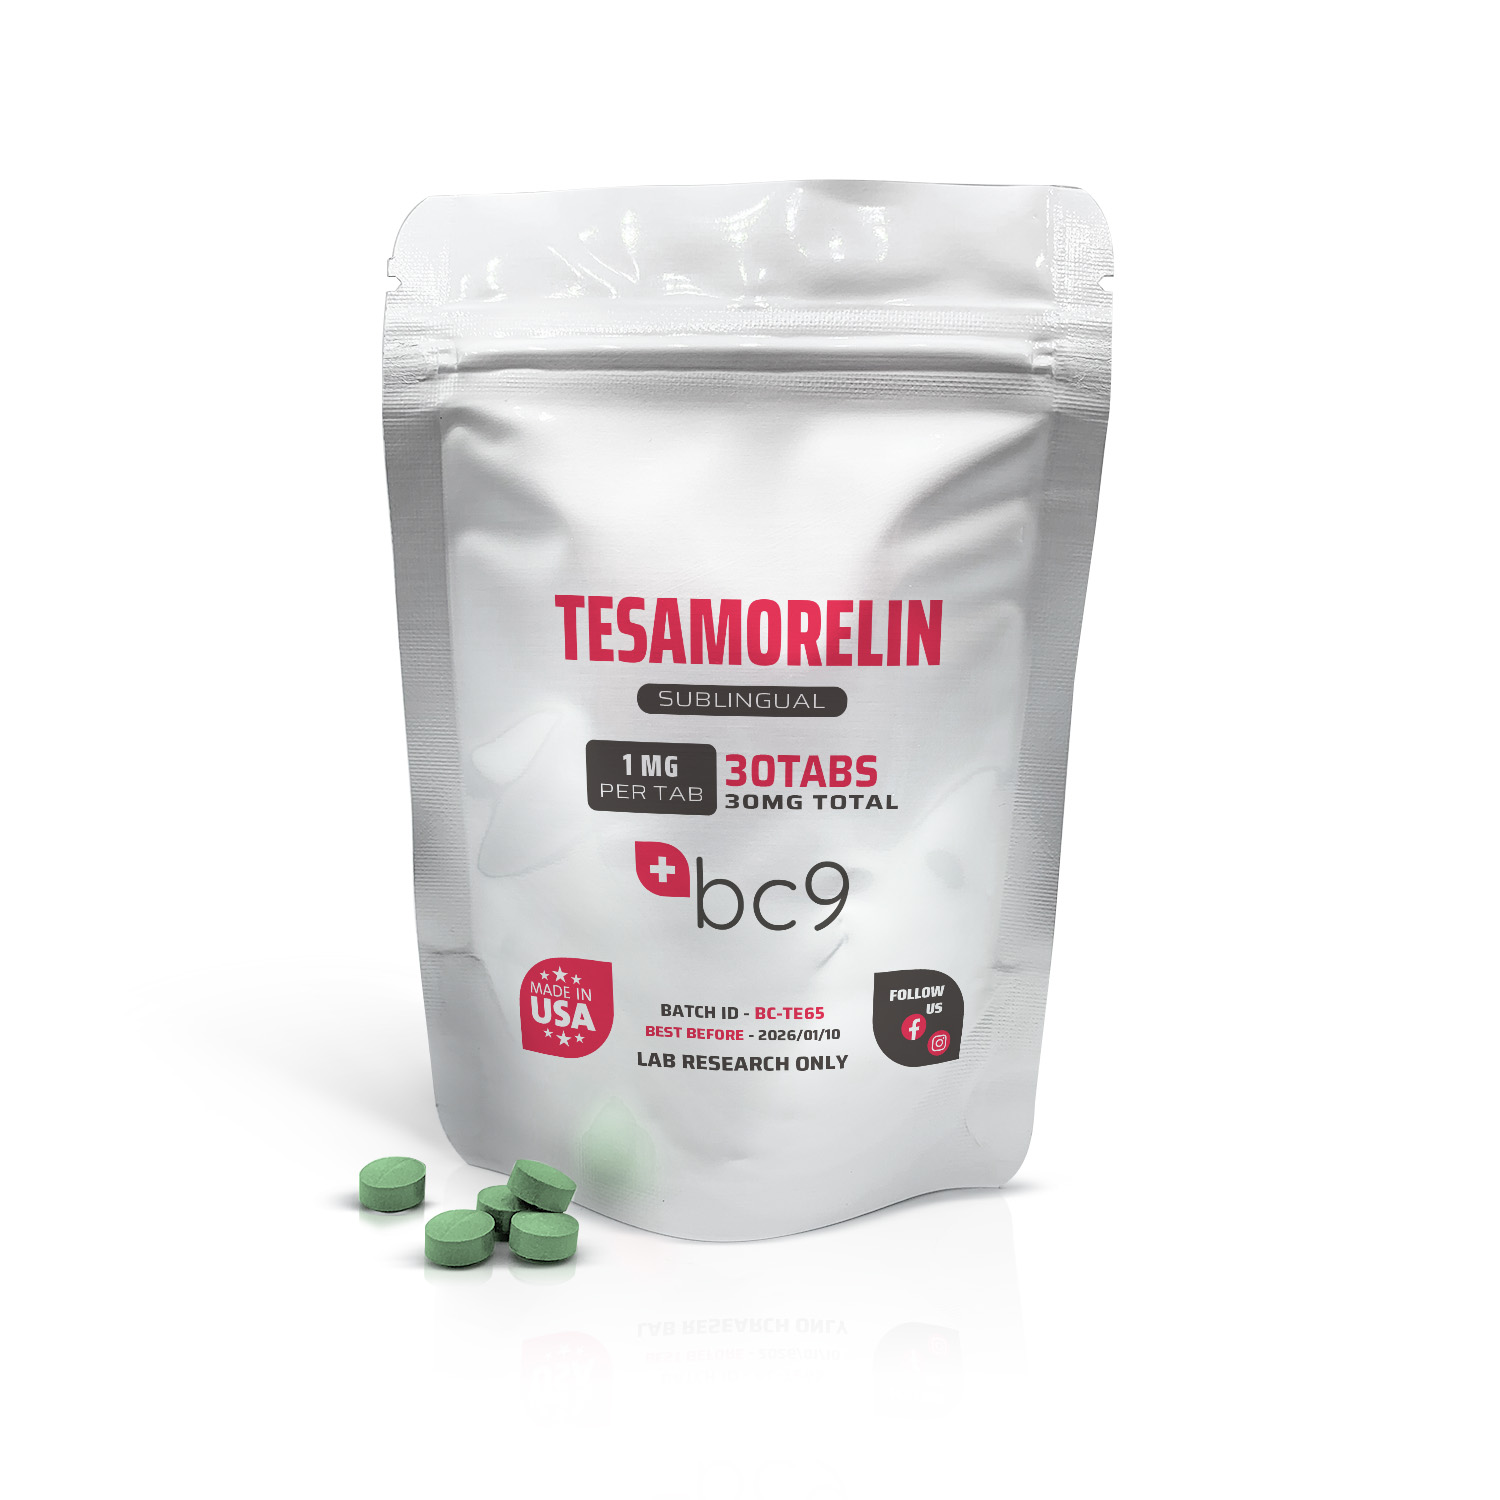 Tesamorelin Peptide For Sale | Fast Shipping | BC9.org